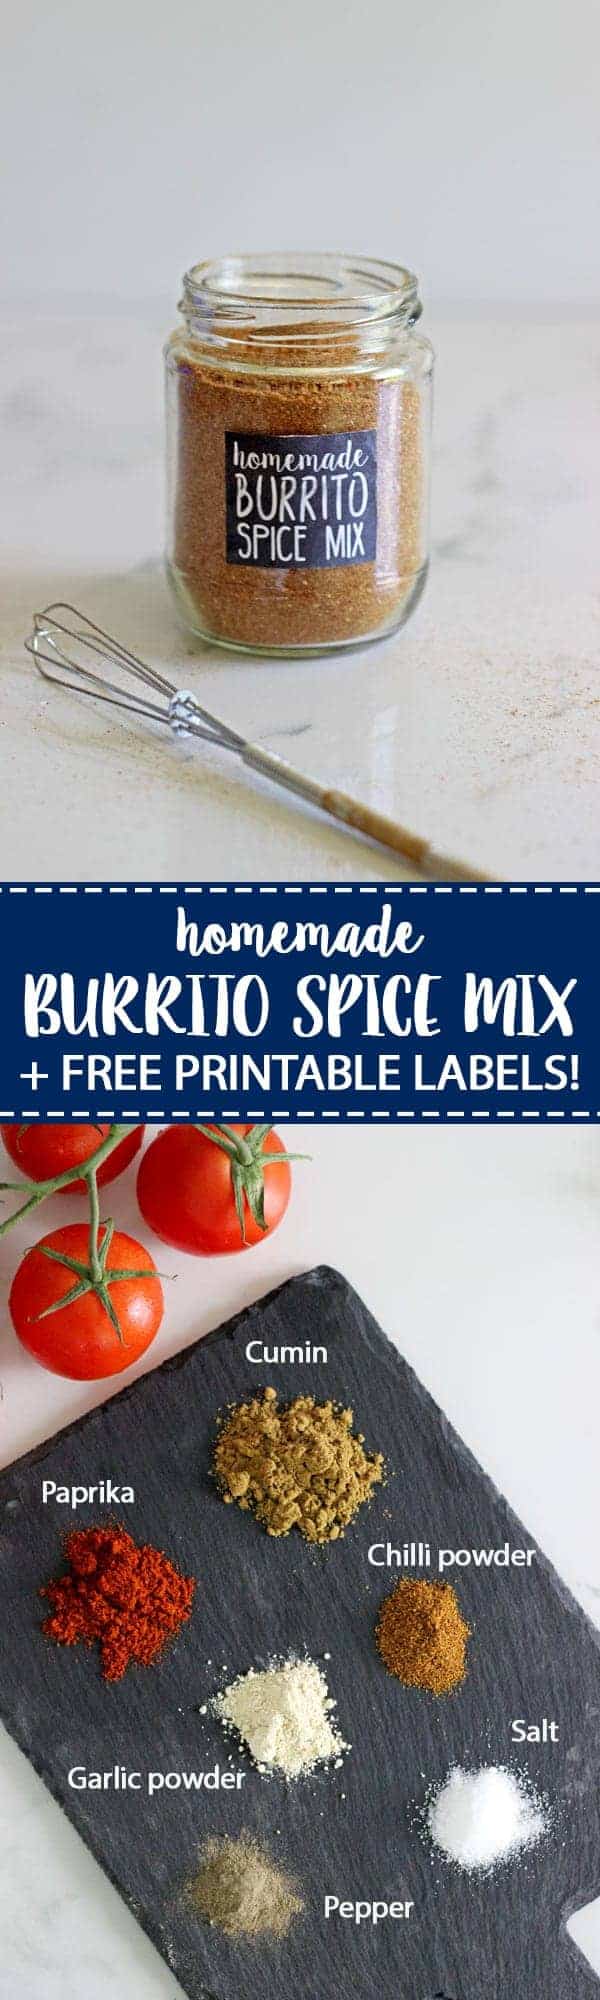 Homemade Burrito Spice Mix (or taco seasoning) - the perfect blend of spices to make your favourite Mexican meal in minutes! Perfect for beef burritos, nachos, chicken strips for tacos, refried beans or anything Mexican! #mexicanfood #tacotuesday #burritospicemix #tacoseasoning #easymeals #spicemix | thekiwicountrygirl.com